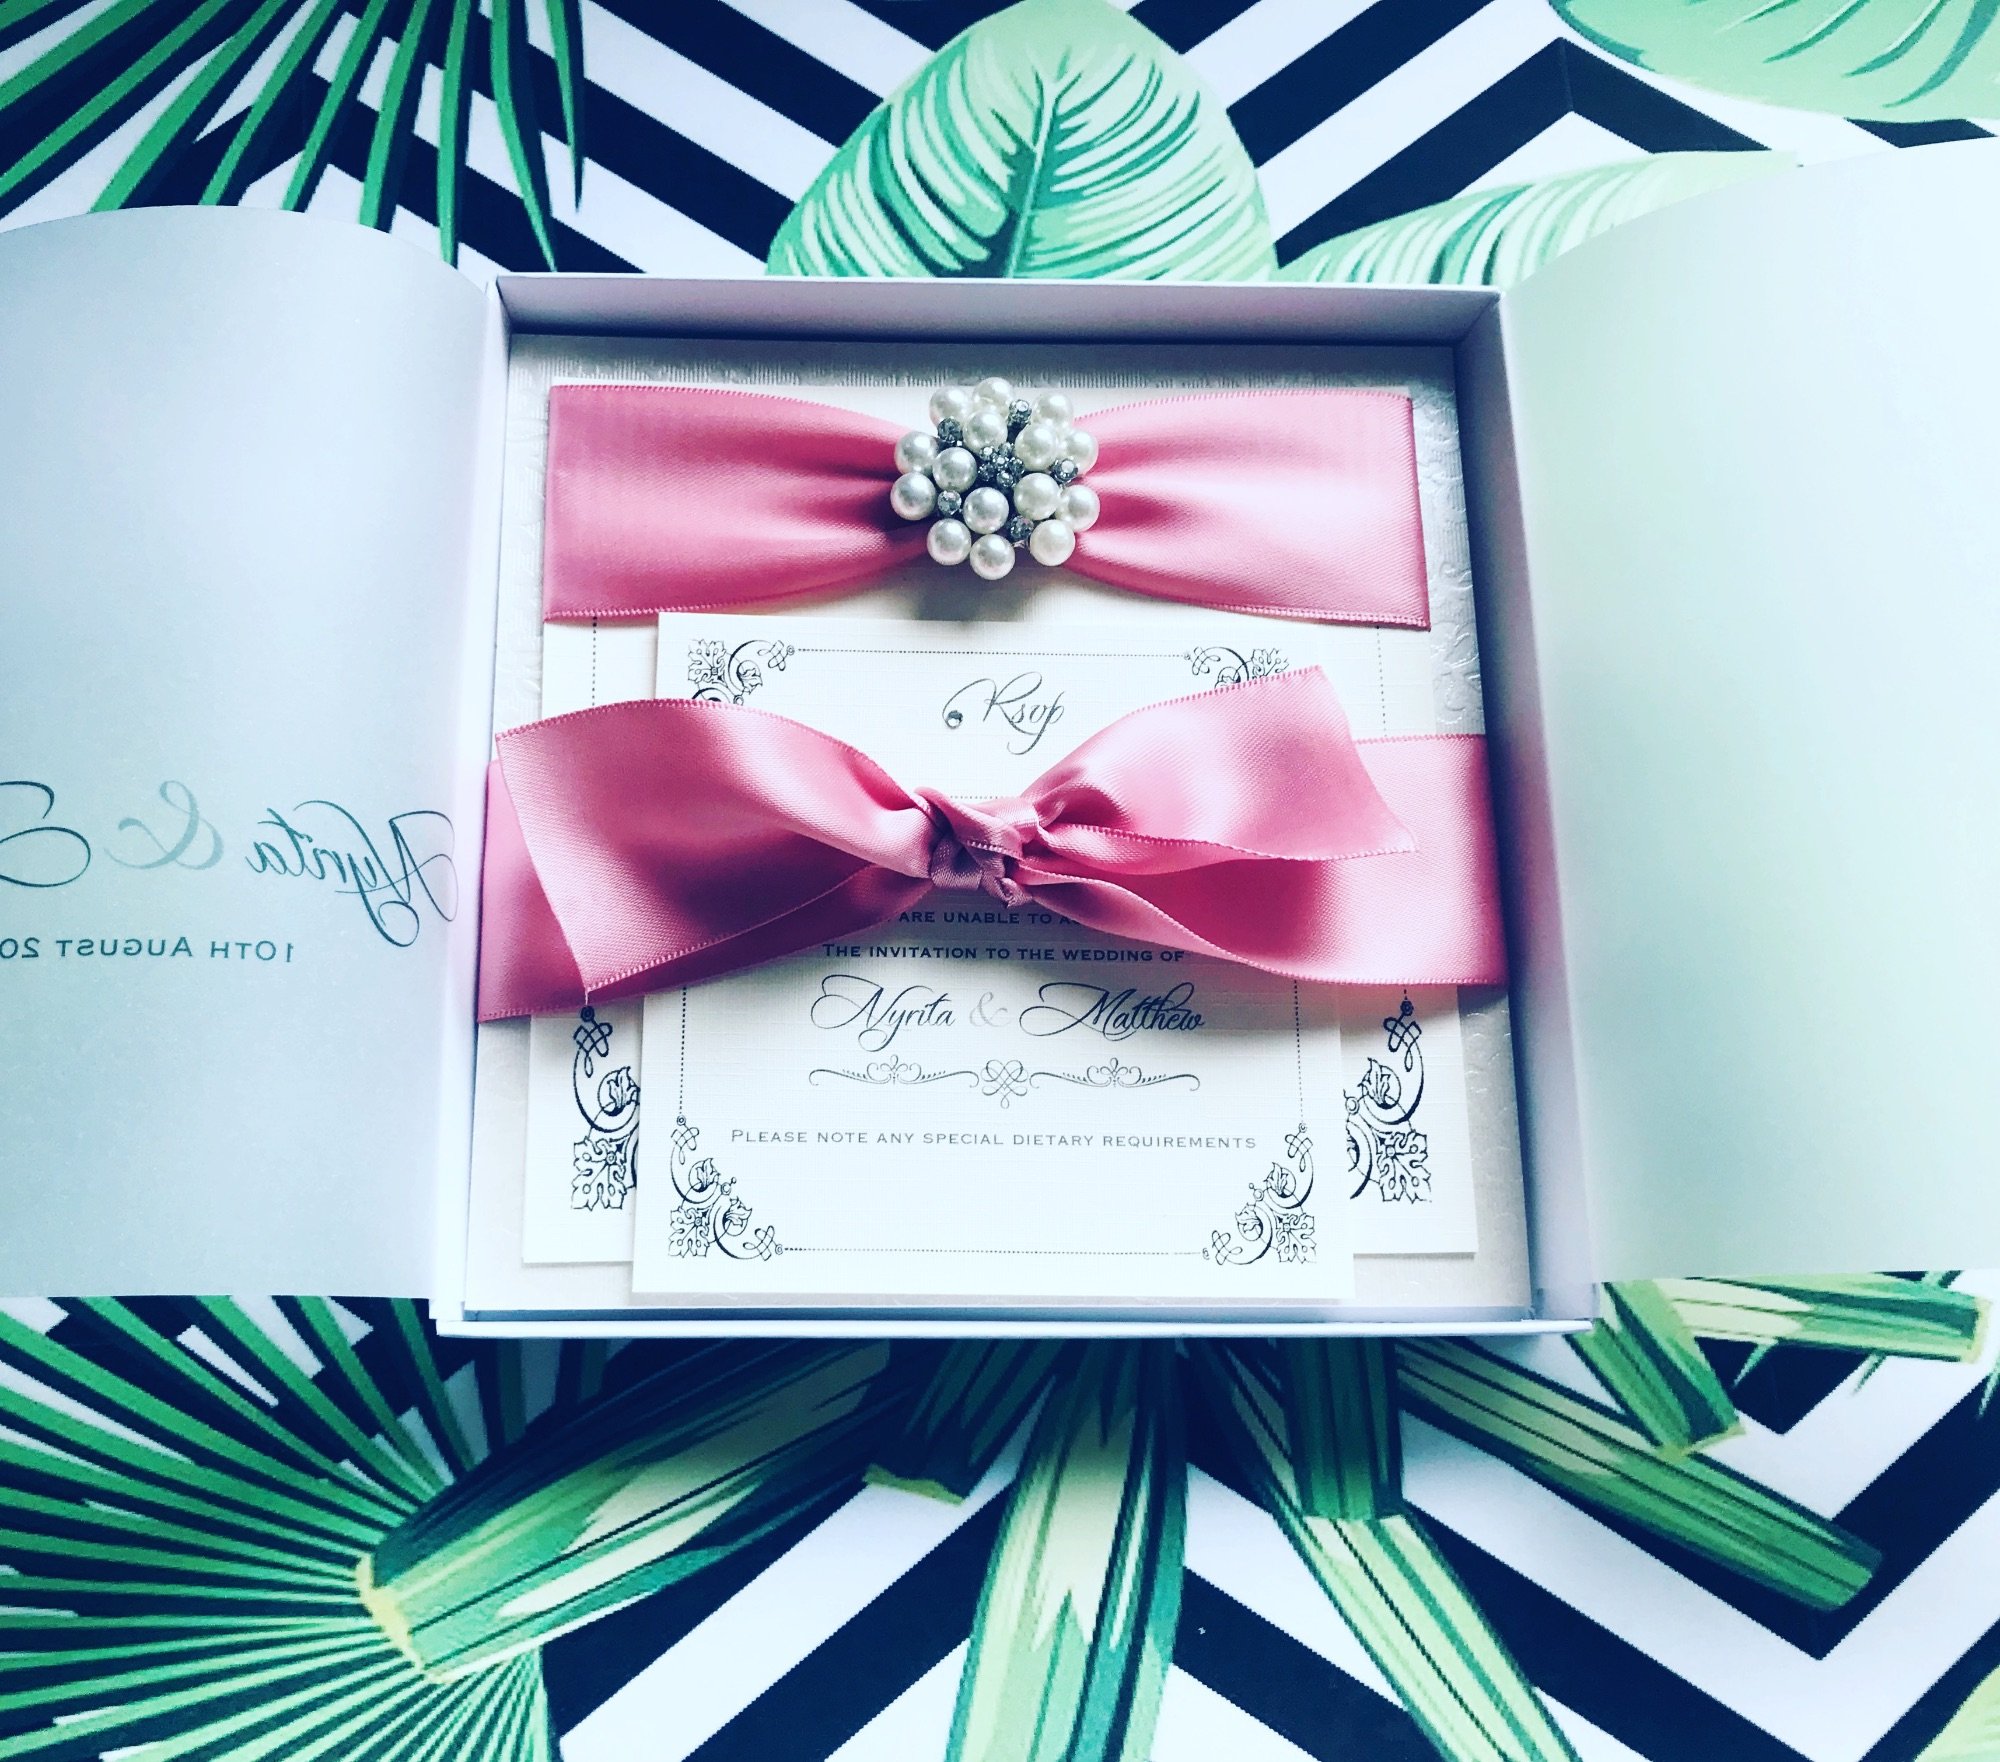 Boxed wedding invitation with dusky pink ribbon and a pearl crystal brooch with rsvp and additional inserts